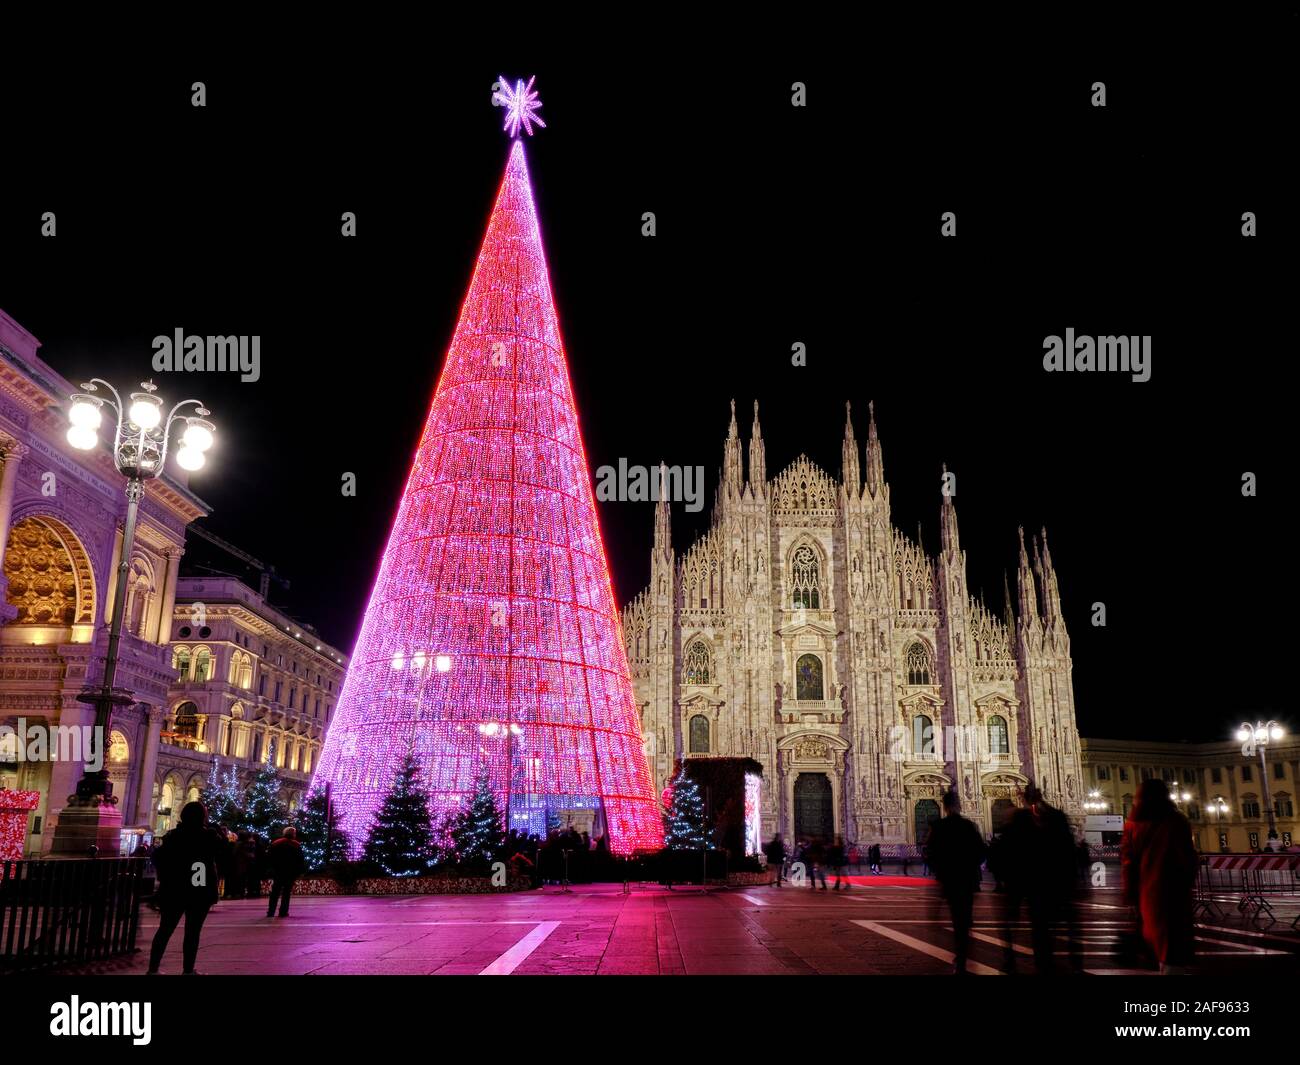 Milan, Italy - December 10 2019: Artificial Christmas tree in front of Milan cathedral, Duomo square in december, night view. Stock Photo